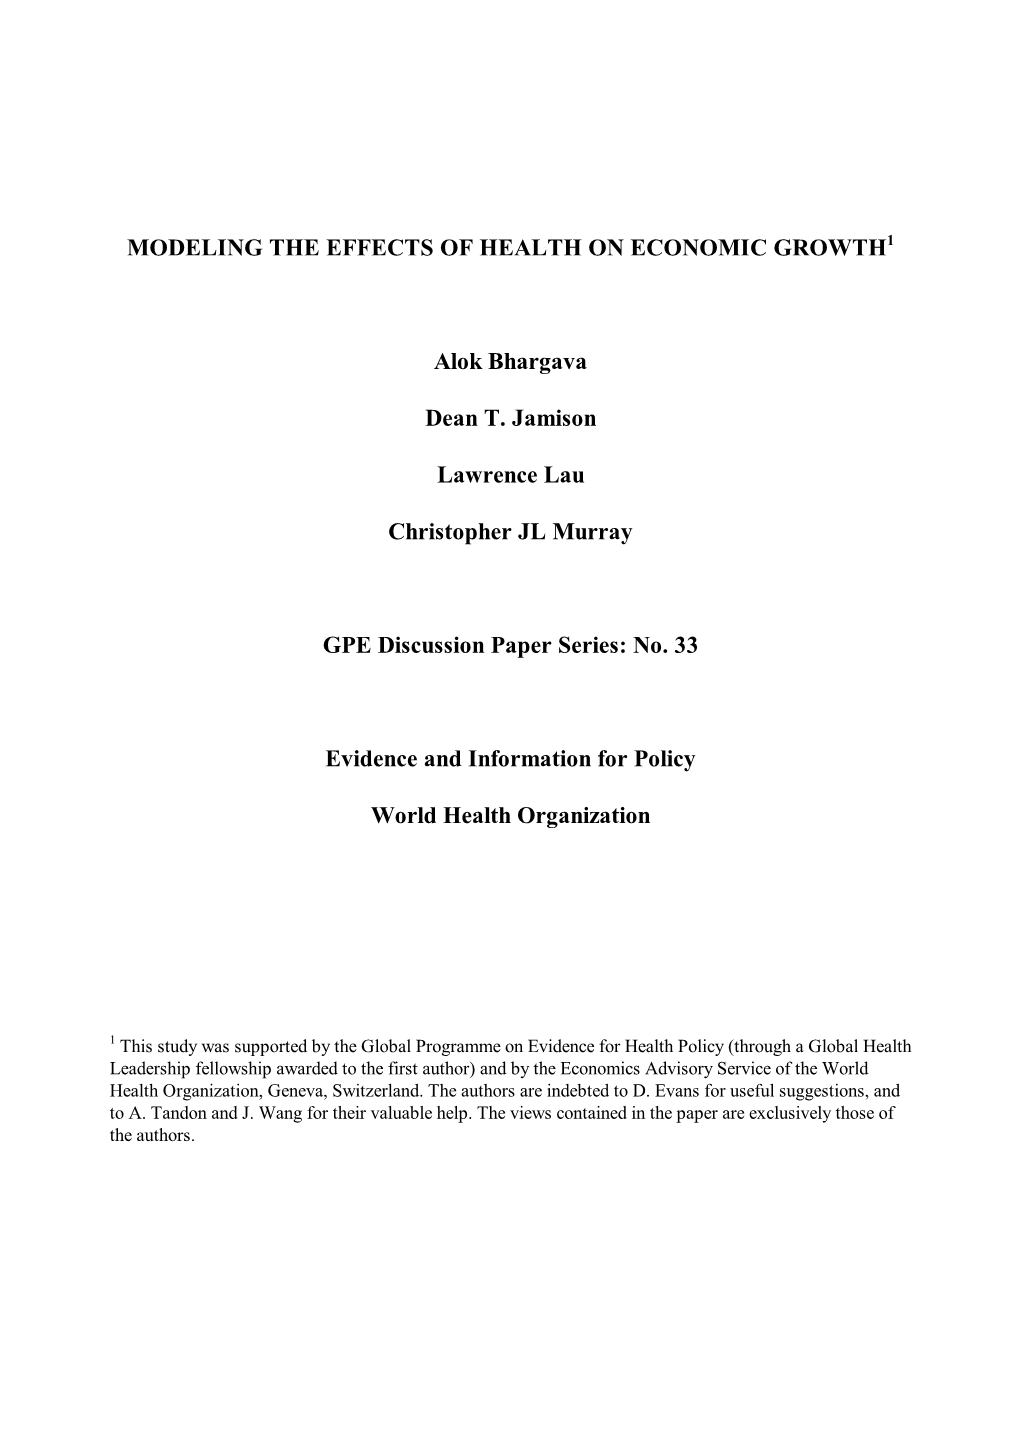 Modeling the Effects of Health on Economic Growth1